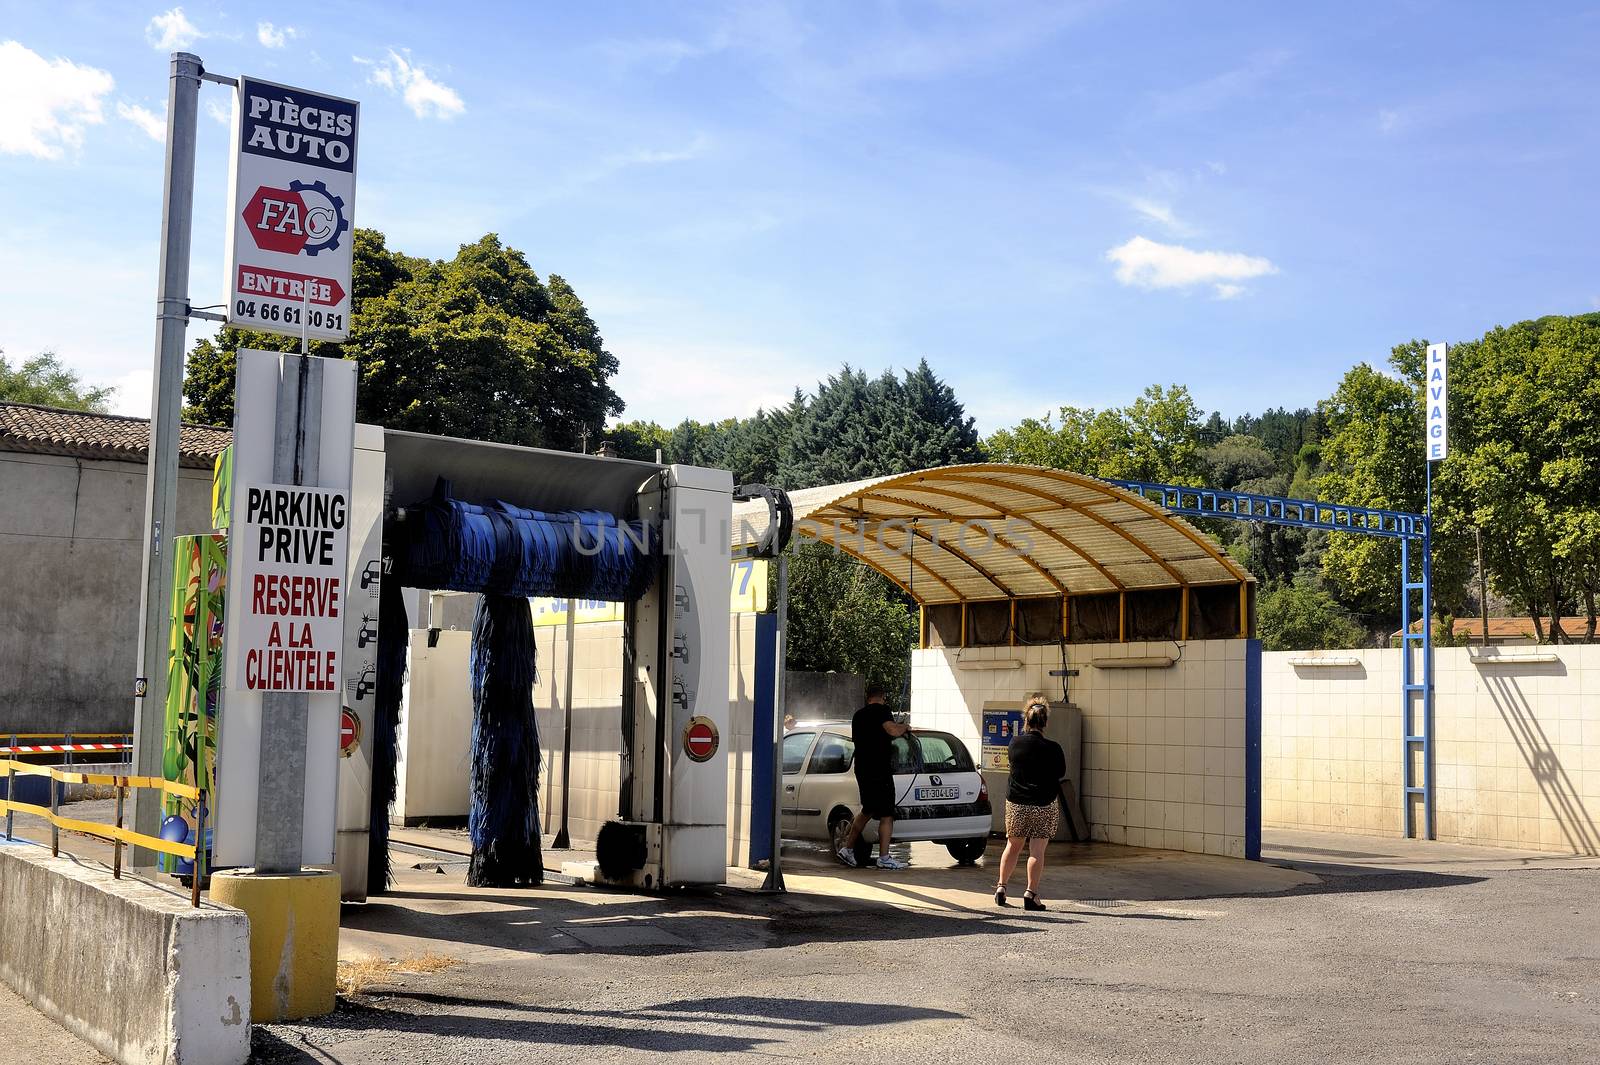 Car wash where customers themselves wash their cars with high-pressure jets free service.